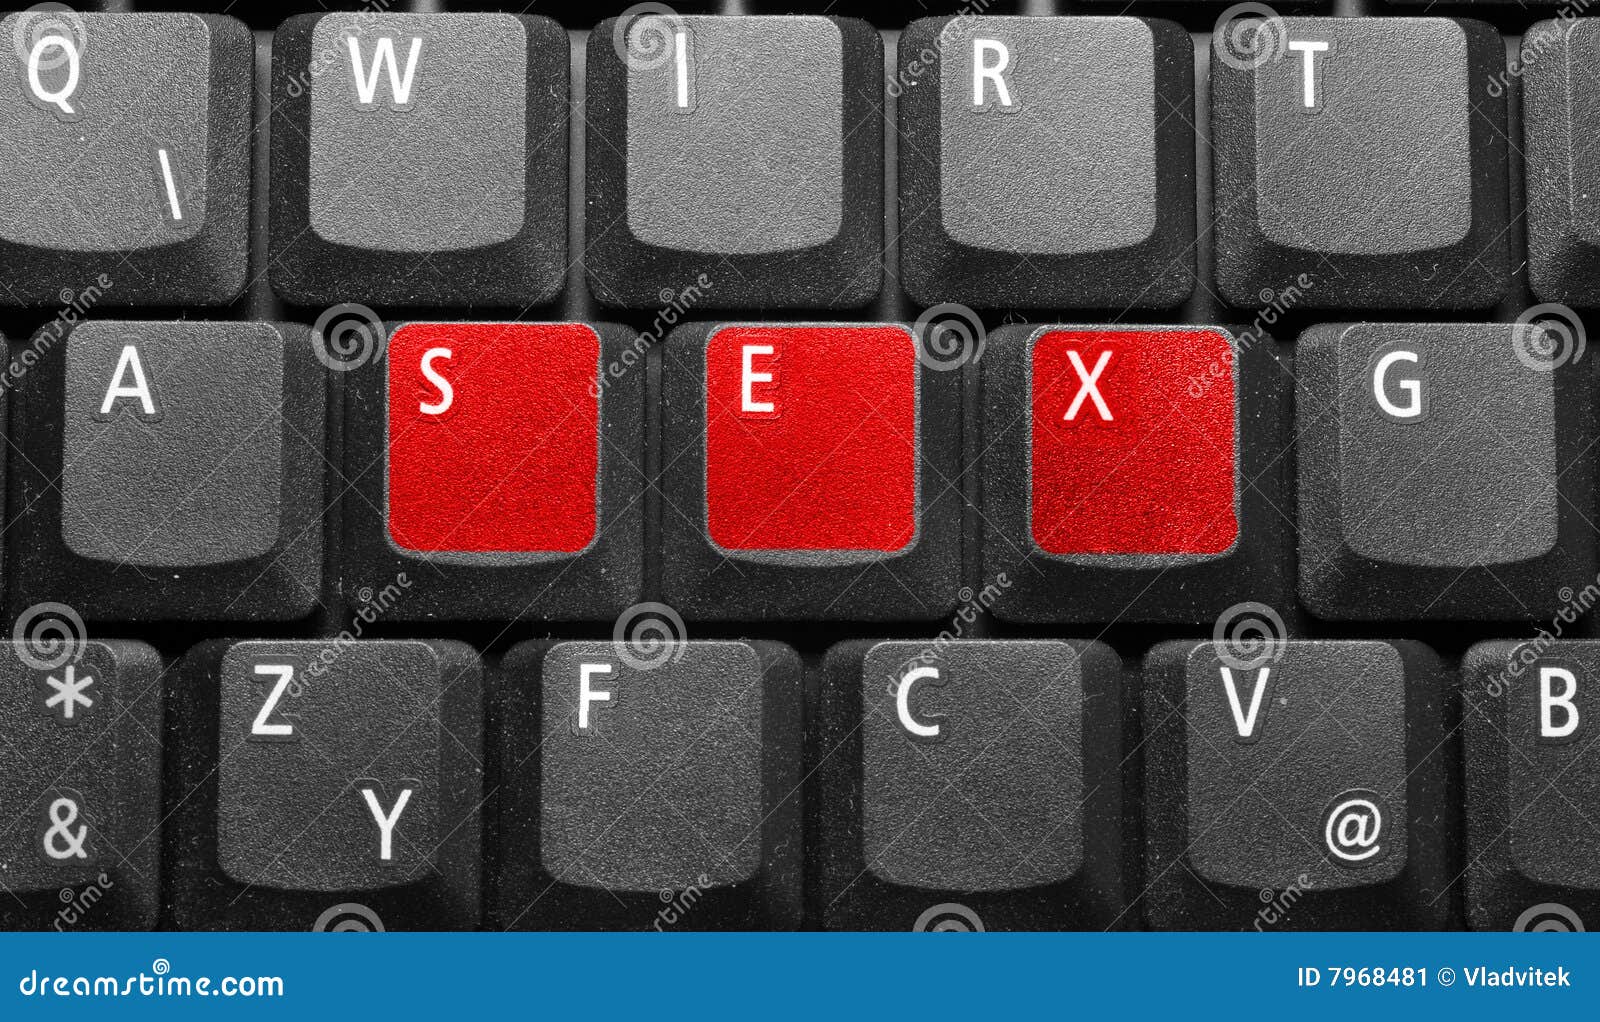 Hot key stock image. Image of background, button, concepts - 7968481